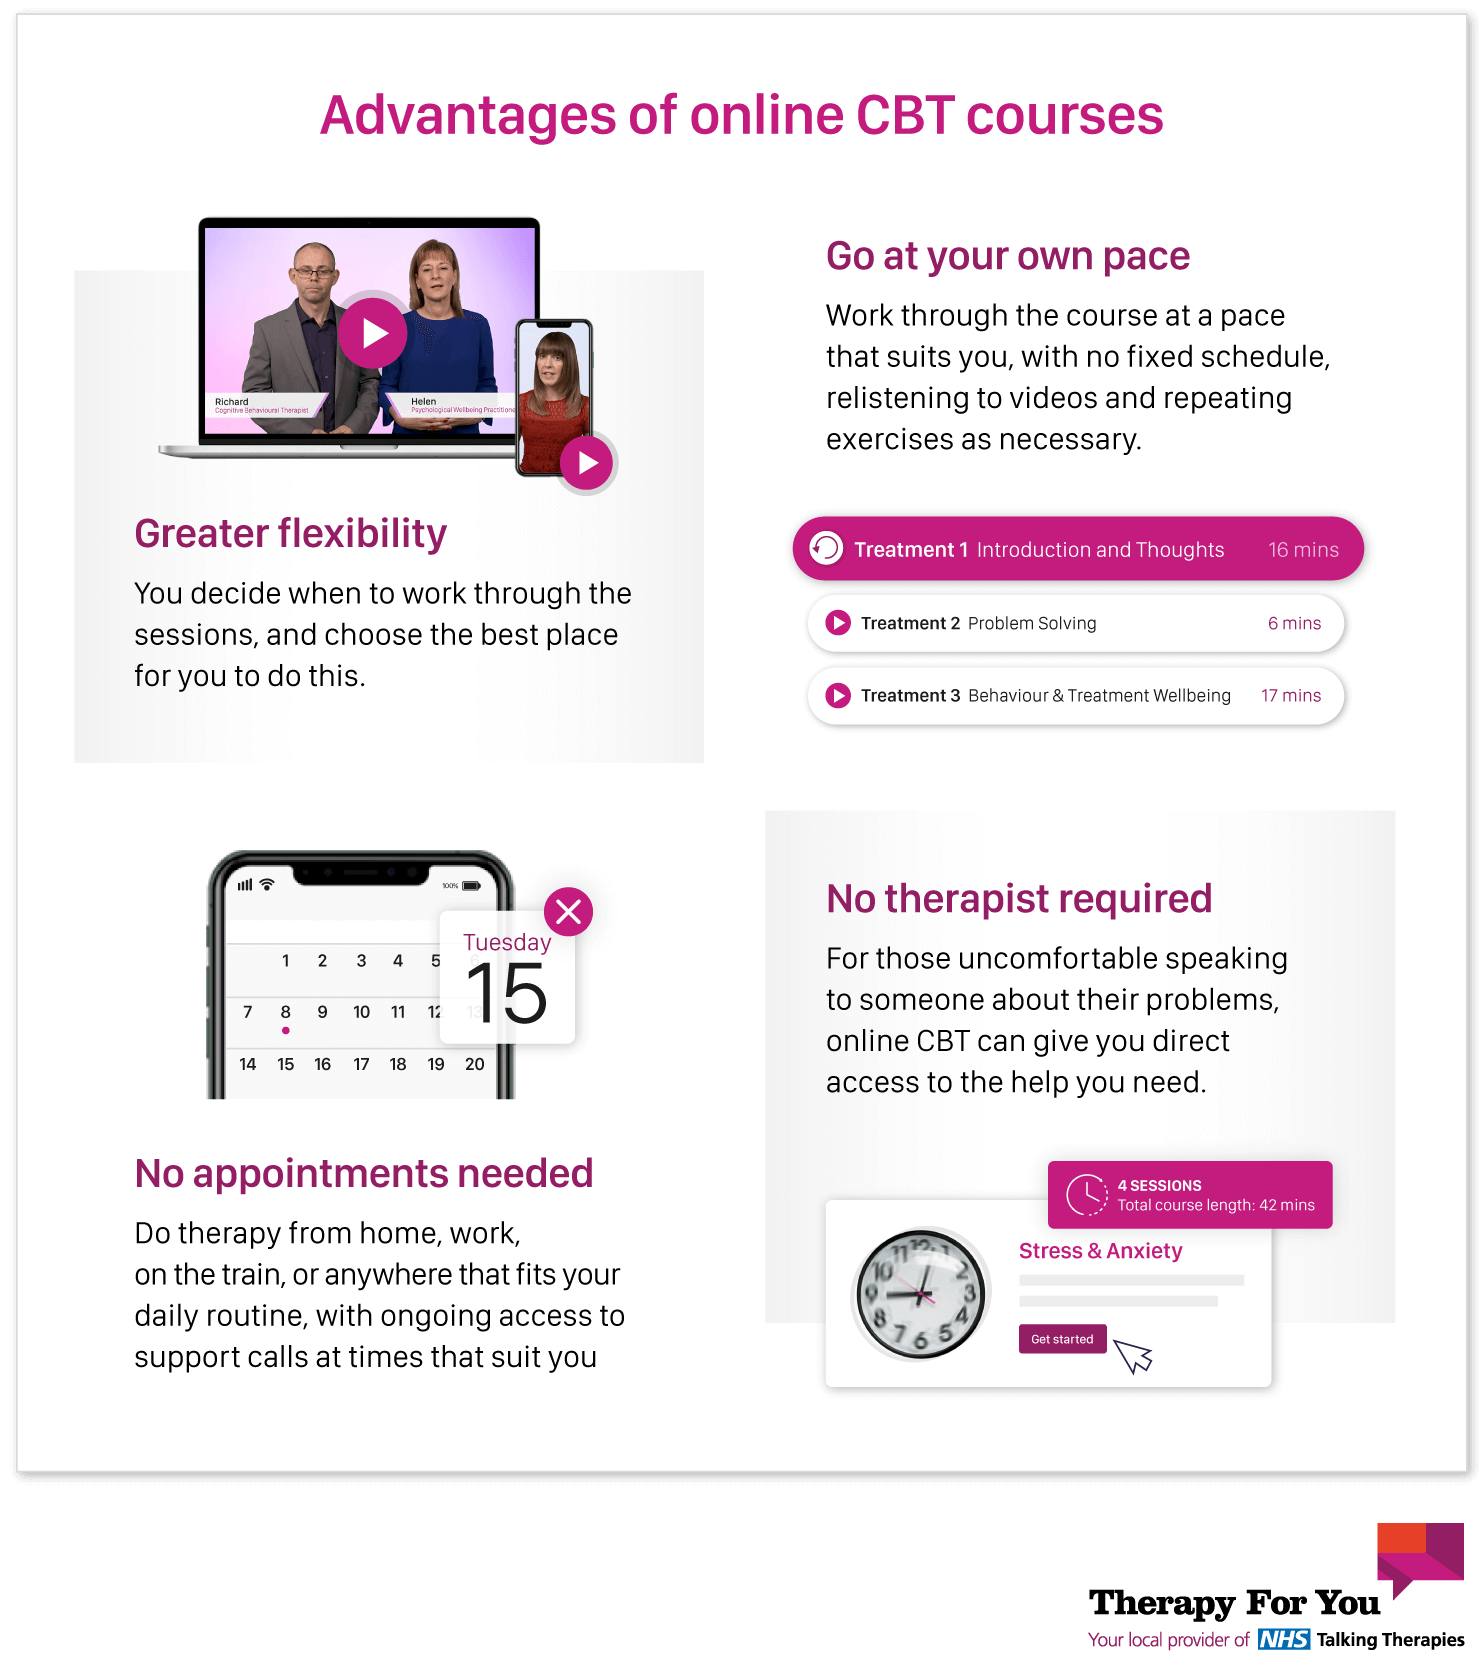 Infographic on the advantages of online CBT courses compared to in-person therapy